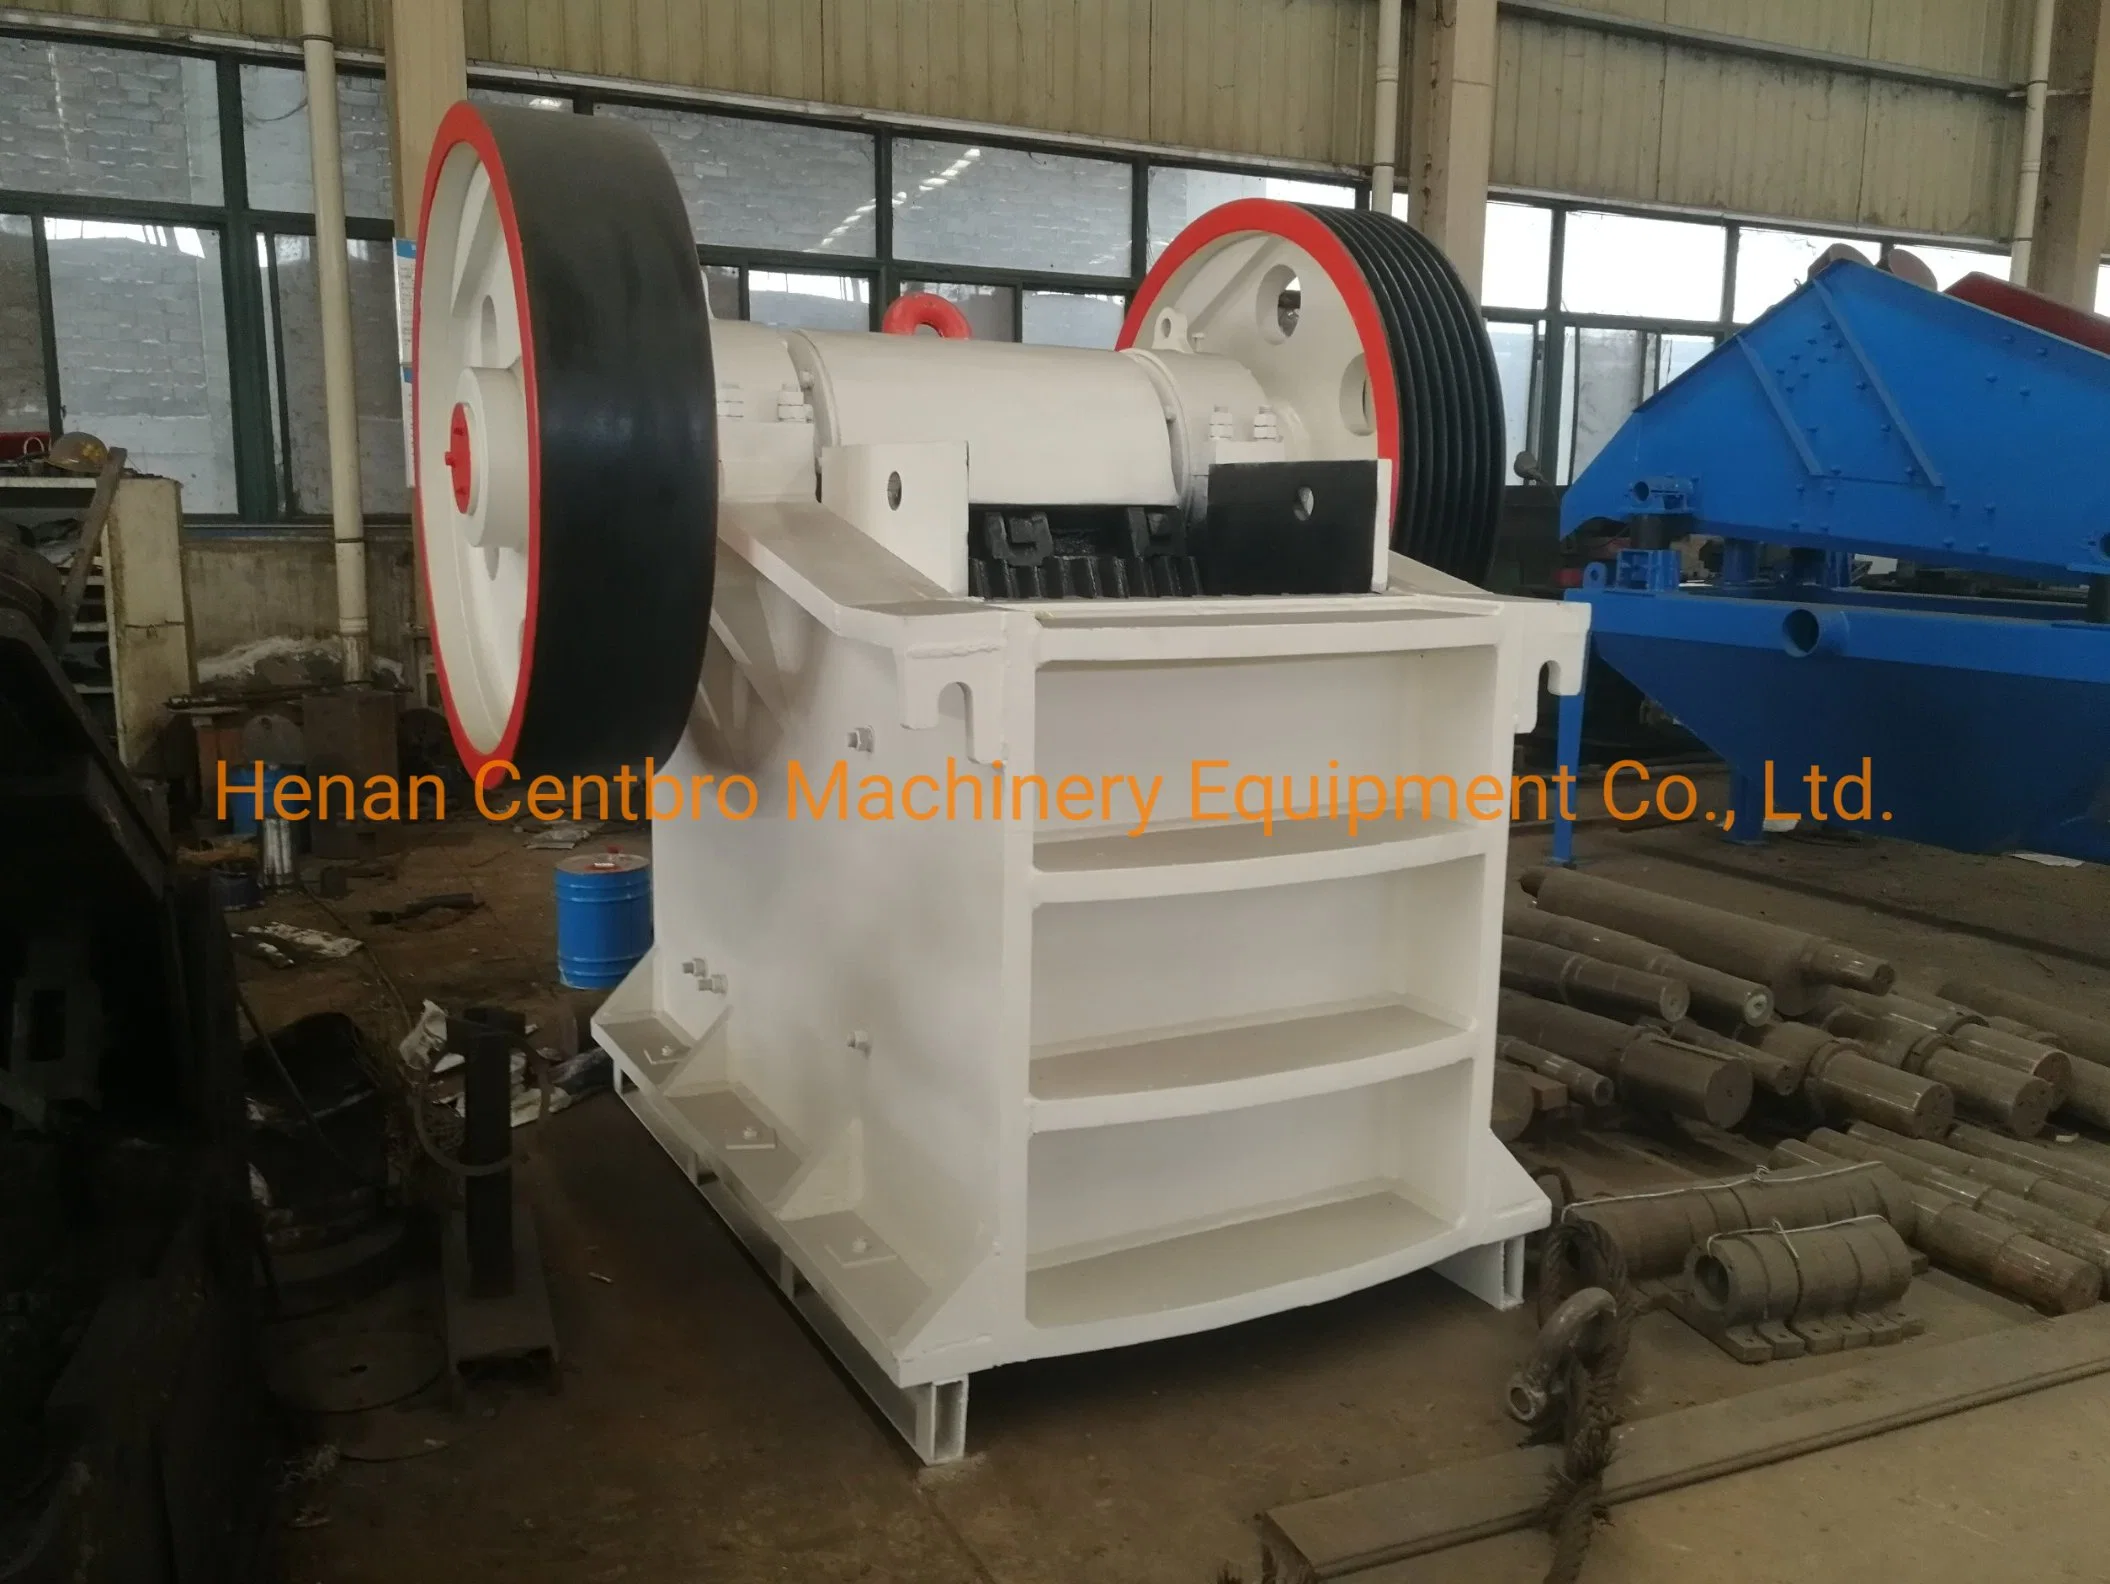 PE 400*600 Jaw Crusher Line with Low Price for Ballast/Rock Gold/Dolomite Sand/Dolomite/Diamond Waste/Copper Ore/Construction Waste/Construction Material